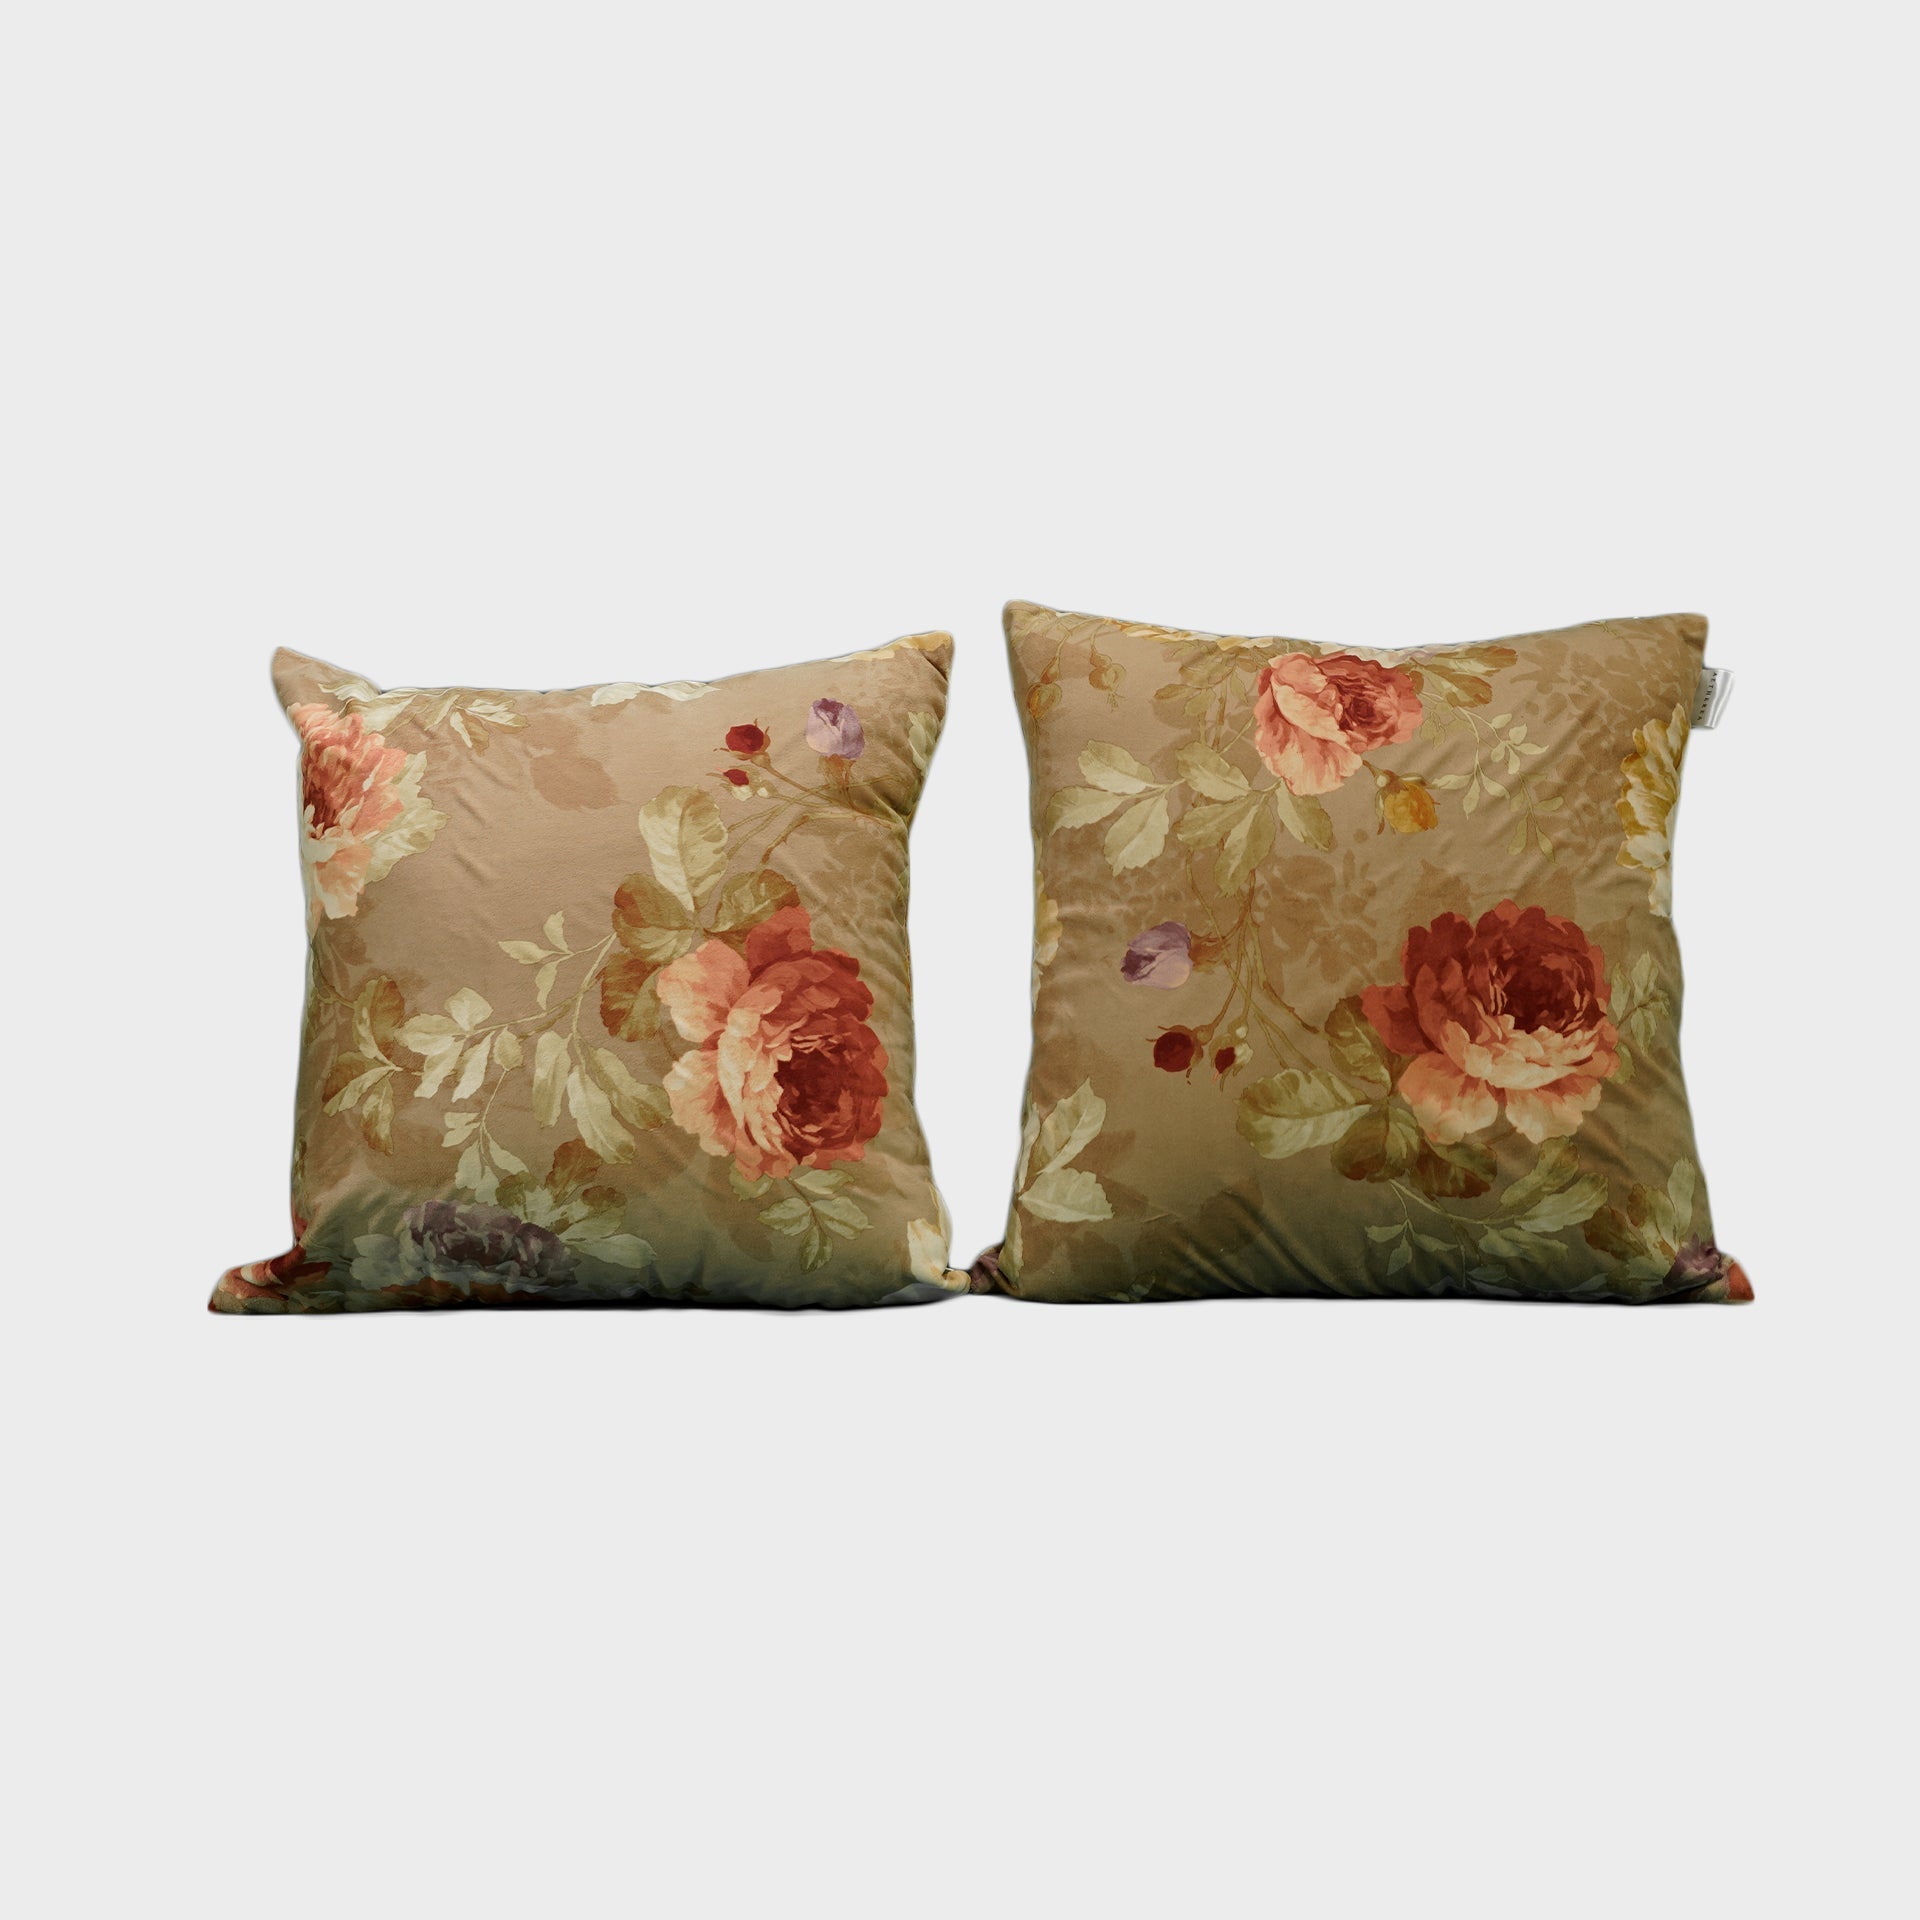 Roseline Cushion Cover Sets at Kamakhyaa by Aetherea. This item is Cotton, Cushion covers, Floral, Home, Printed, Stripes, Upcycled